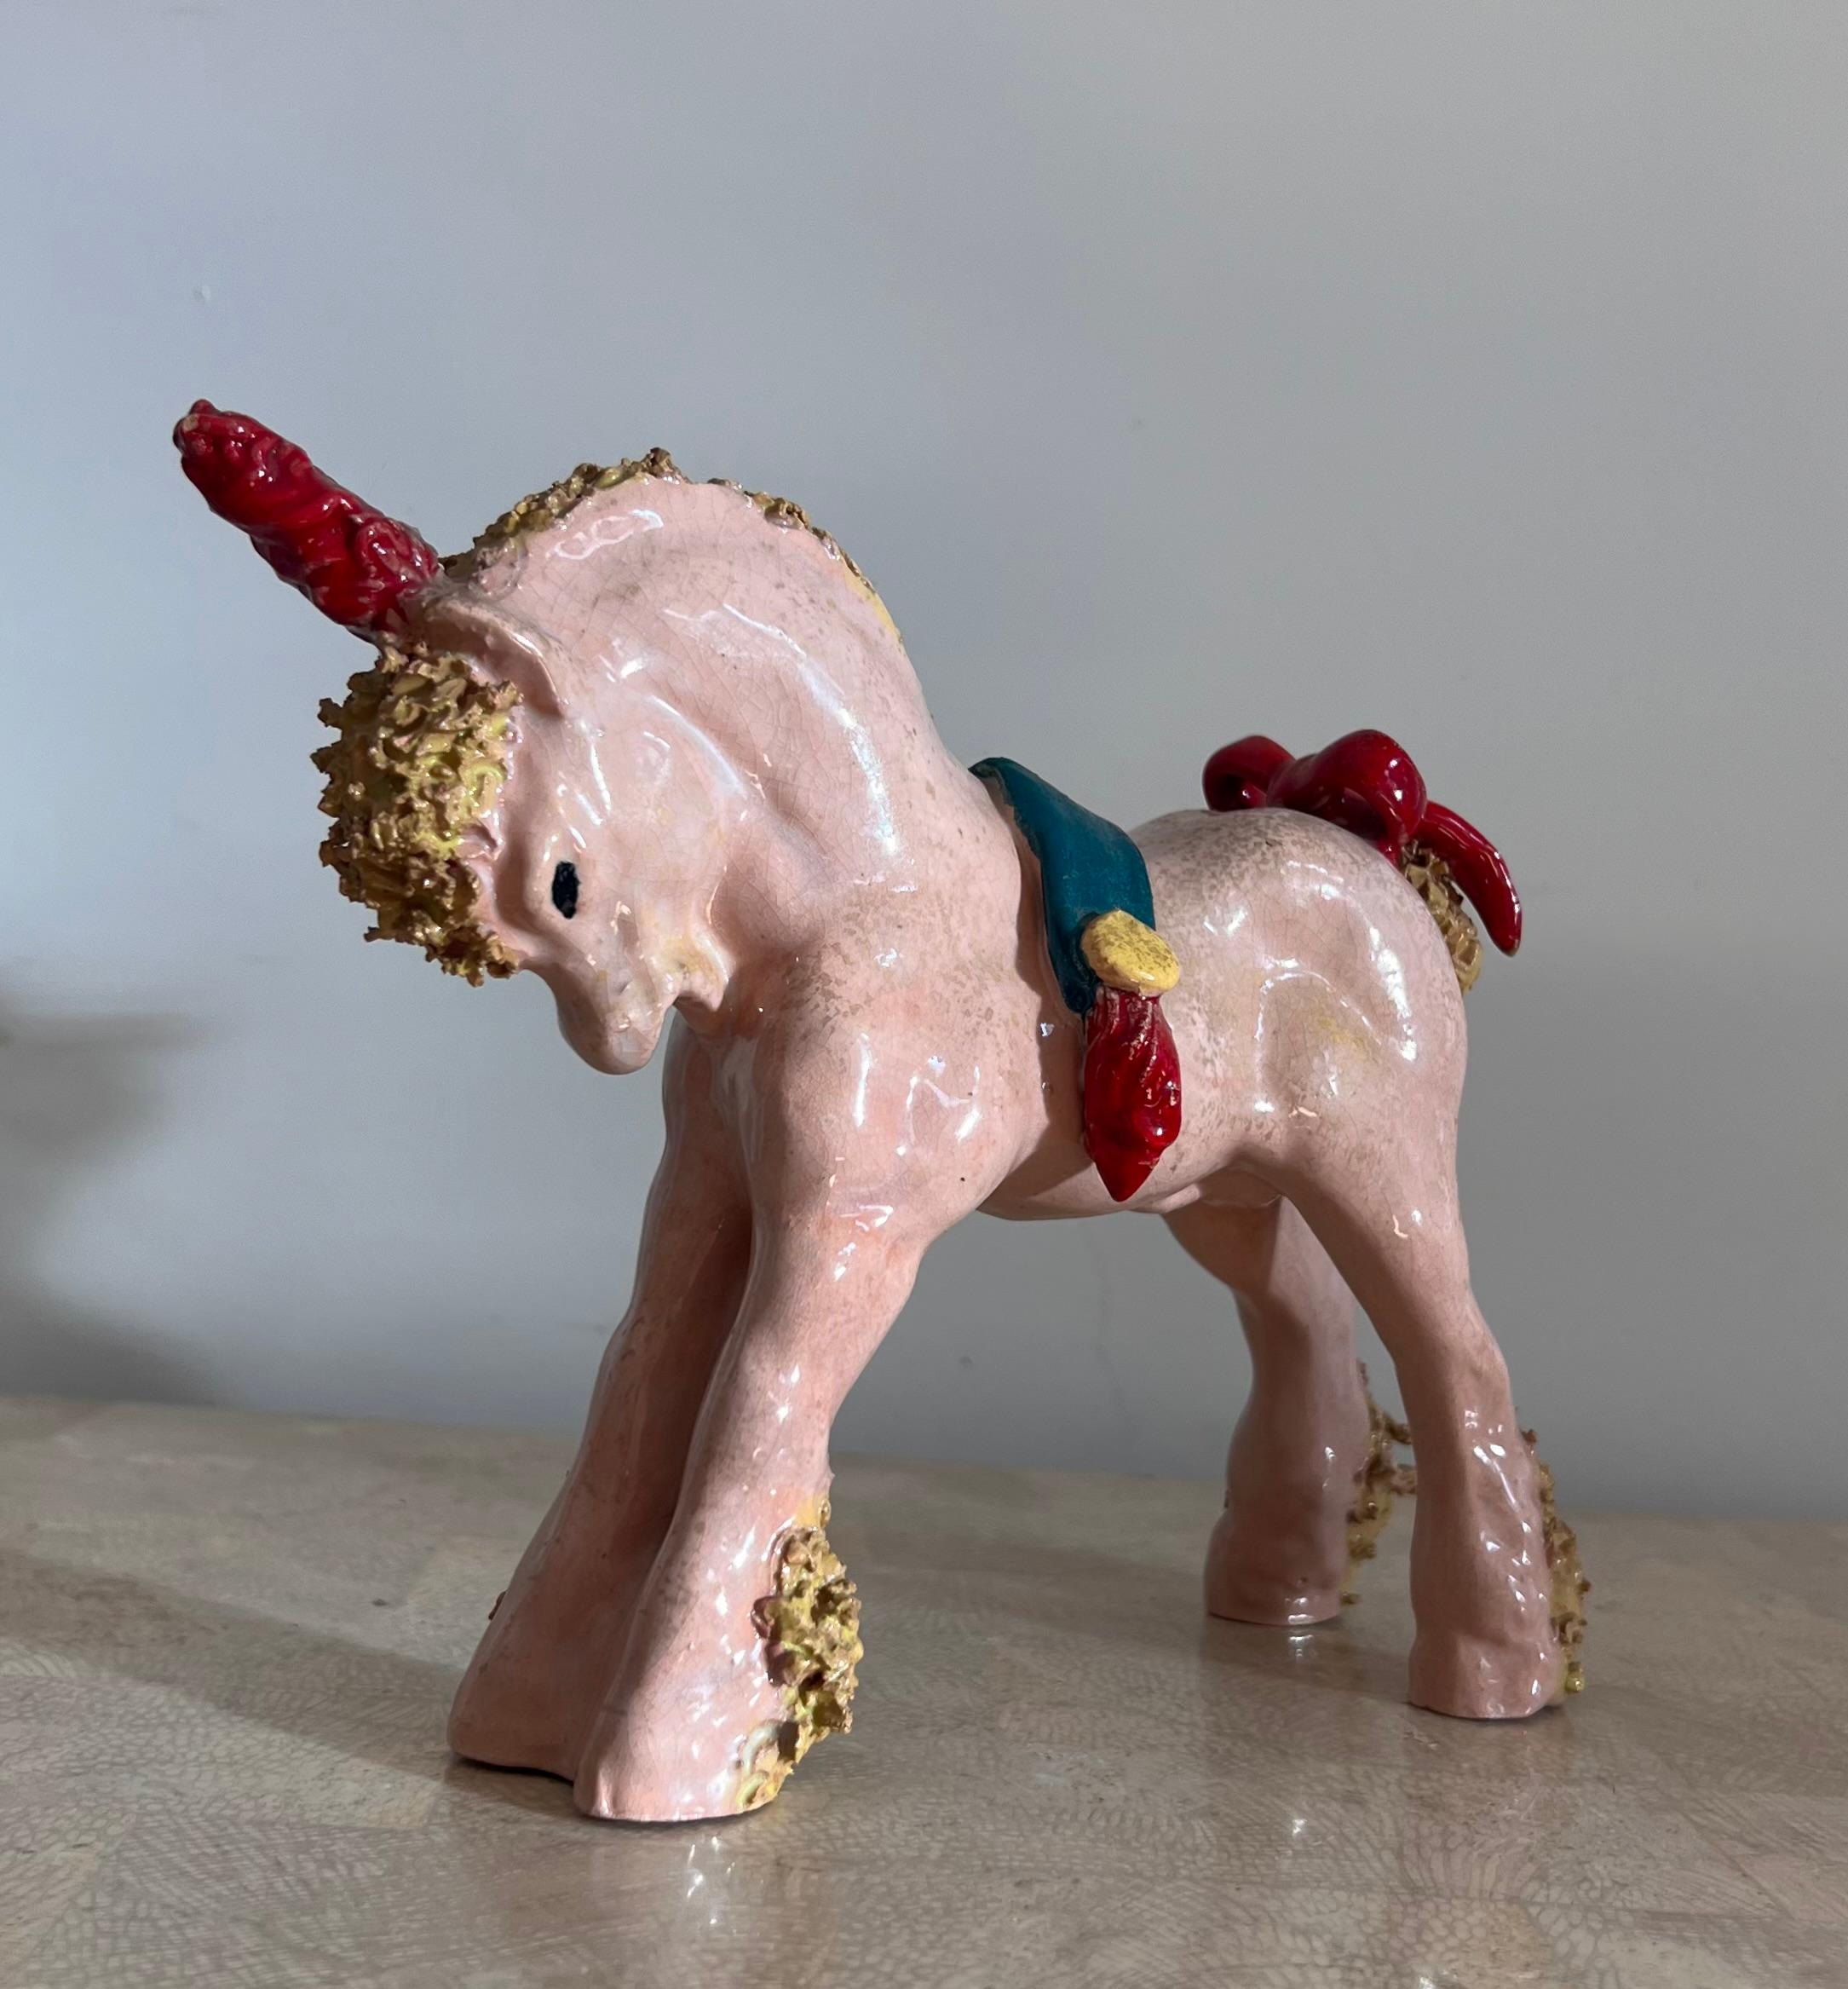 A whimsical little statue of a pony unicorn by Bill Meyer, signed, 20th century. Pale pink with pastel chartreuse hair and hooves, teal saddle with marigold accents, and brick red ribbons and horn. Signed on bottom voice. A lovely memento of the